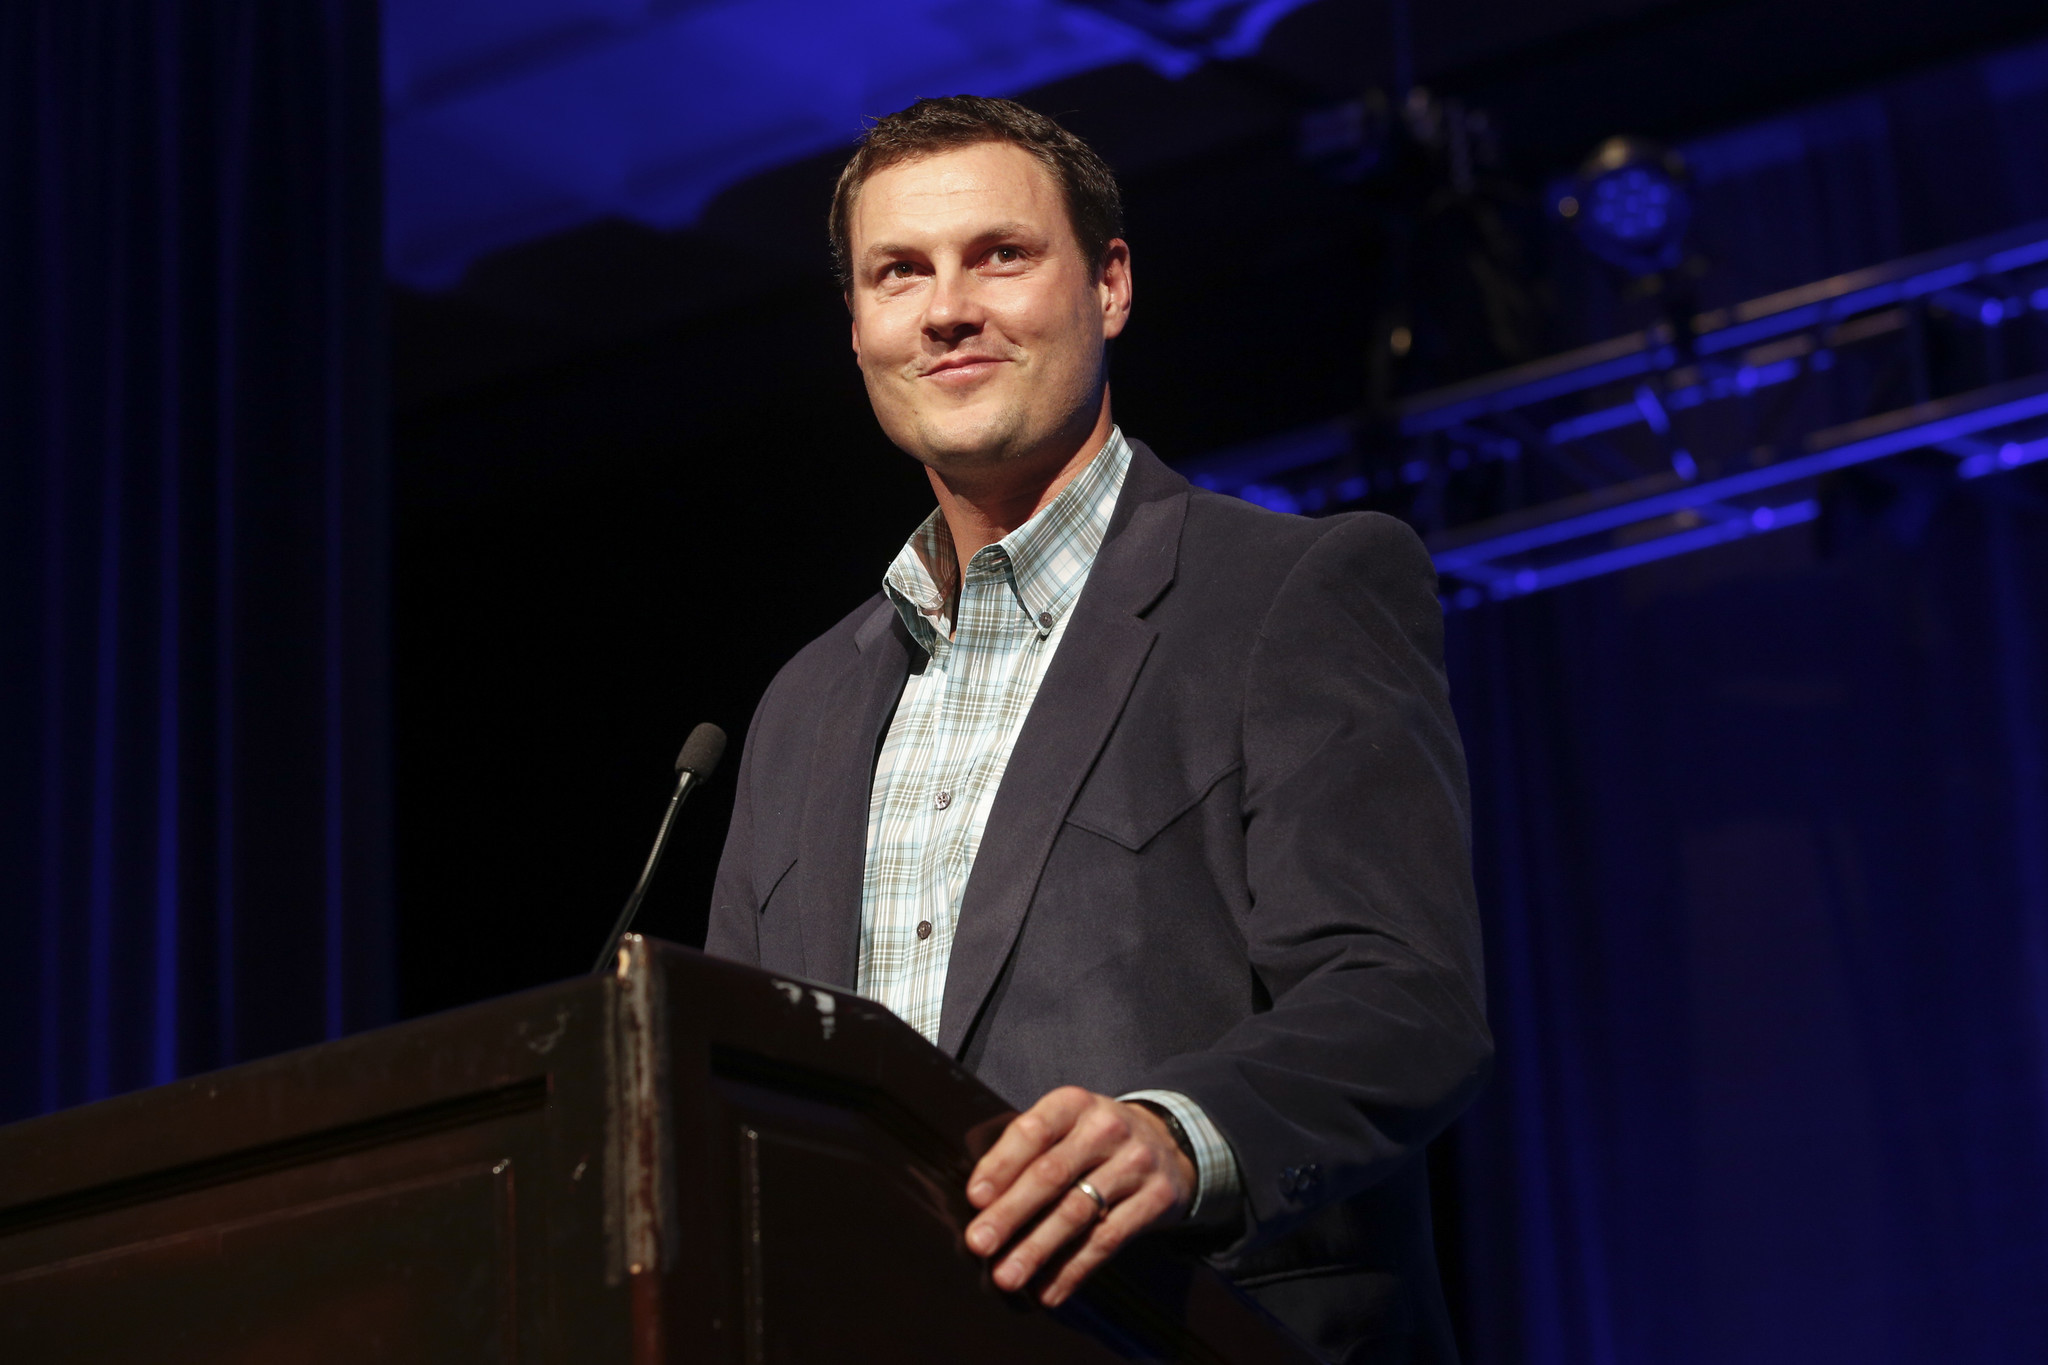 Rivers, emotional, speaks at SD, Hardwick event